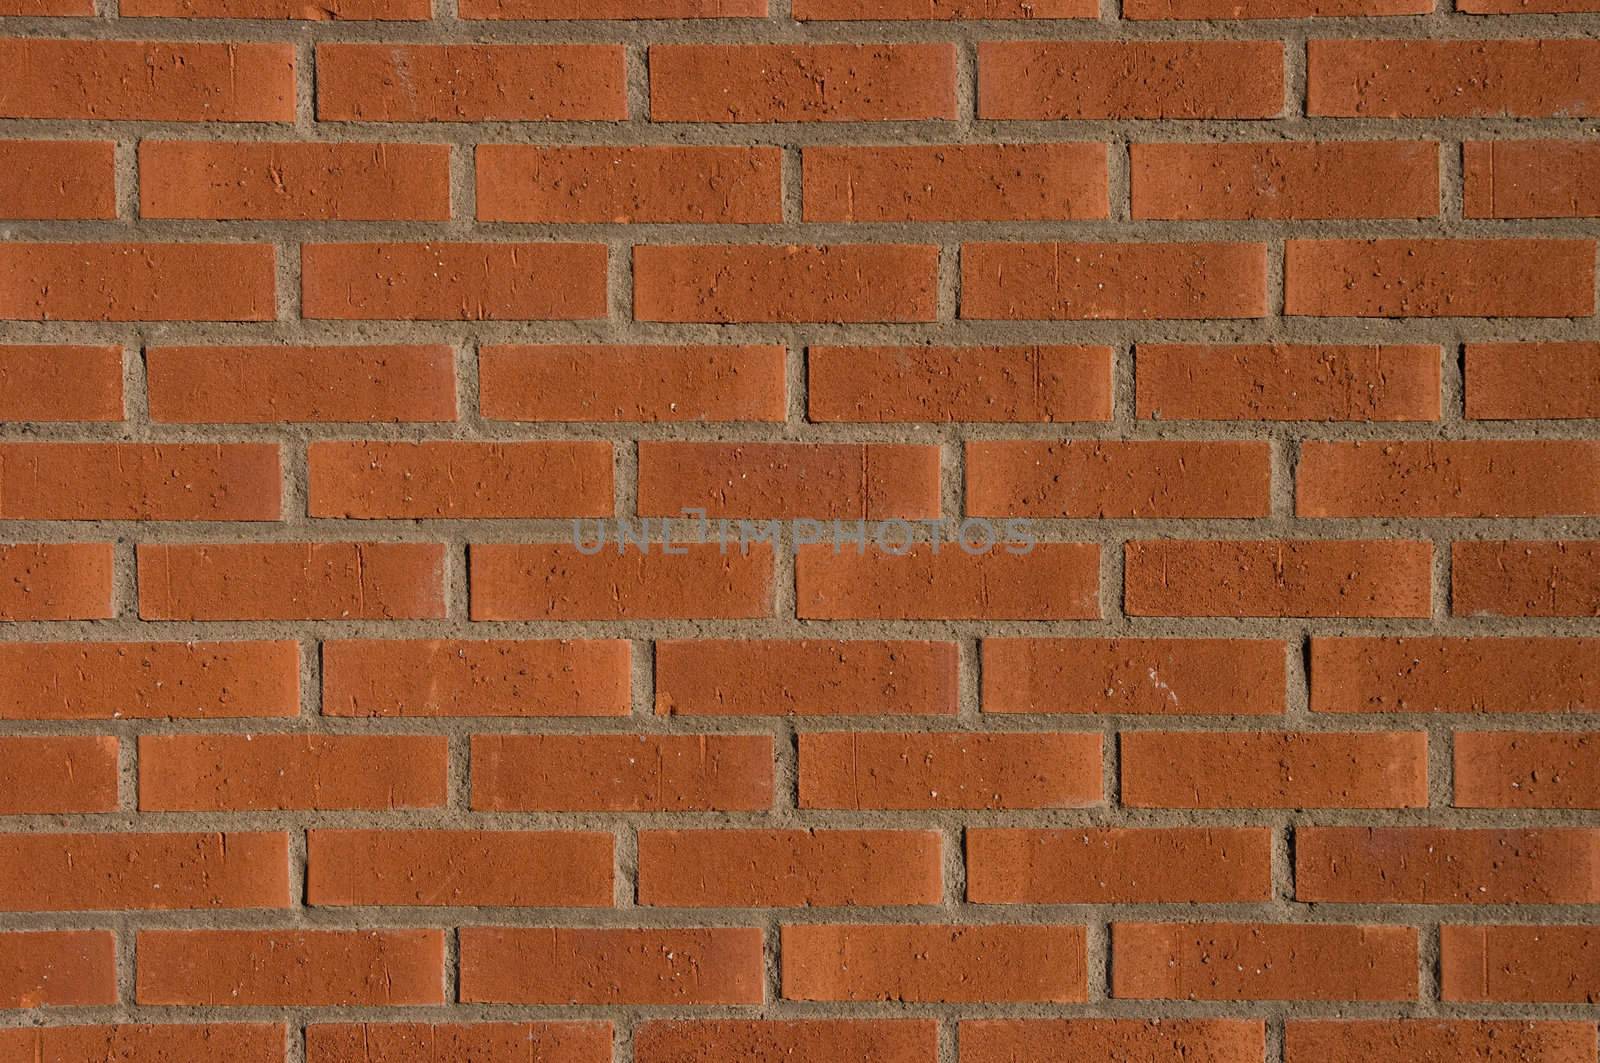 A plain brick wall, tile after tile, looks real solid.